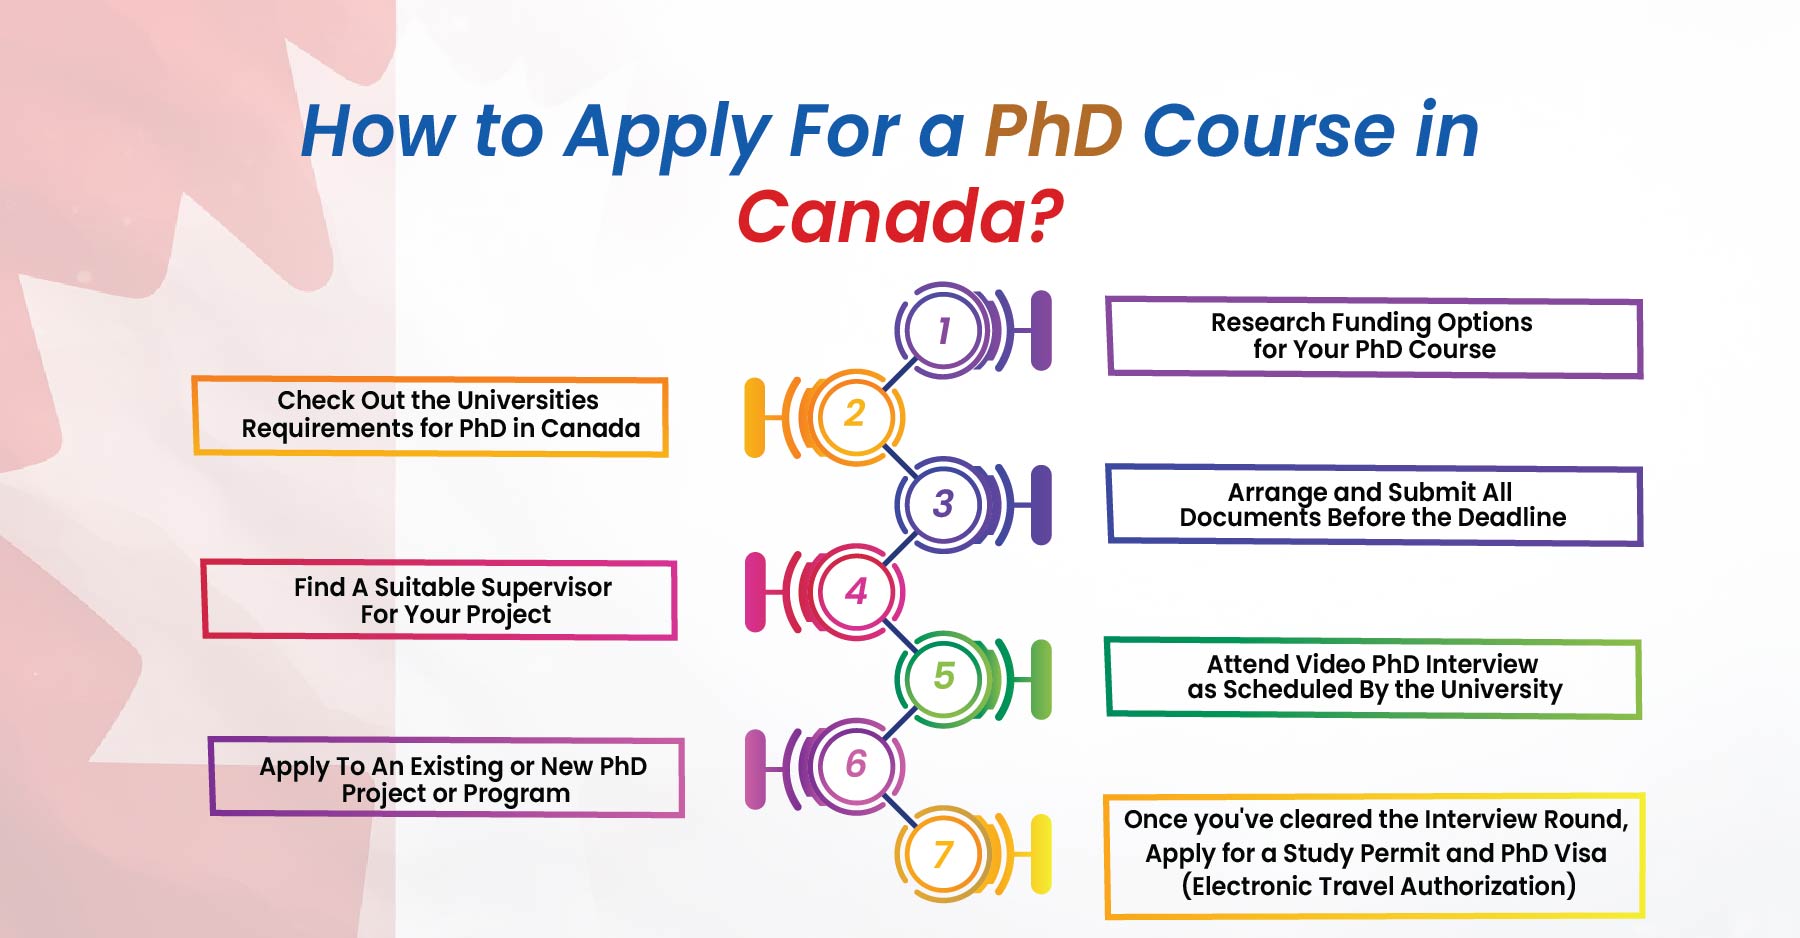 Heres the step by step guide by Gradding.com to Apply for Your Canadian PhD Visa